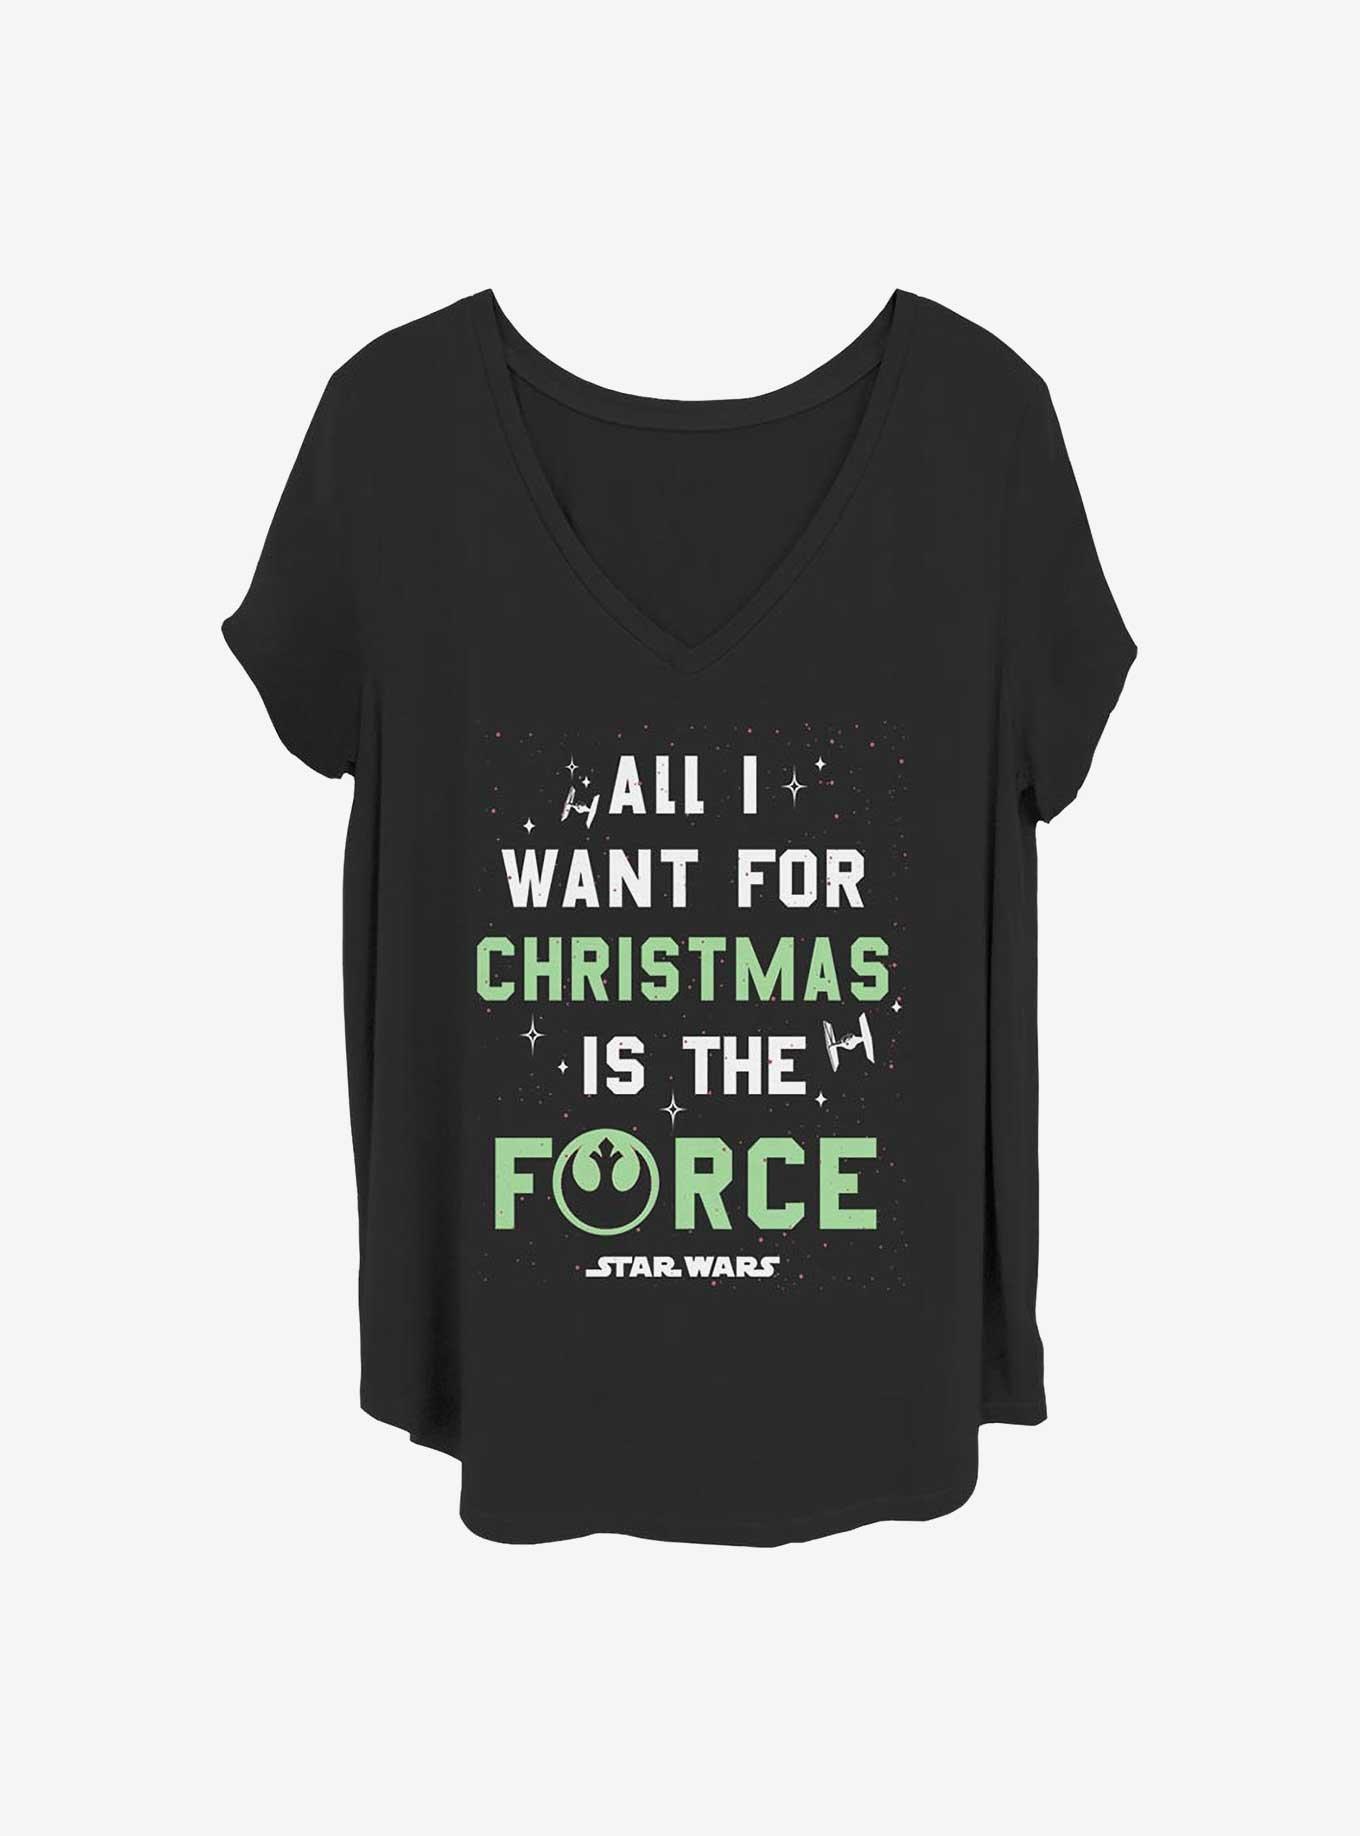 Star Wars Want The Force Girls T-Shirt Plus